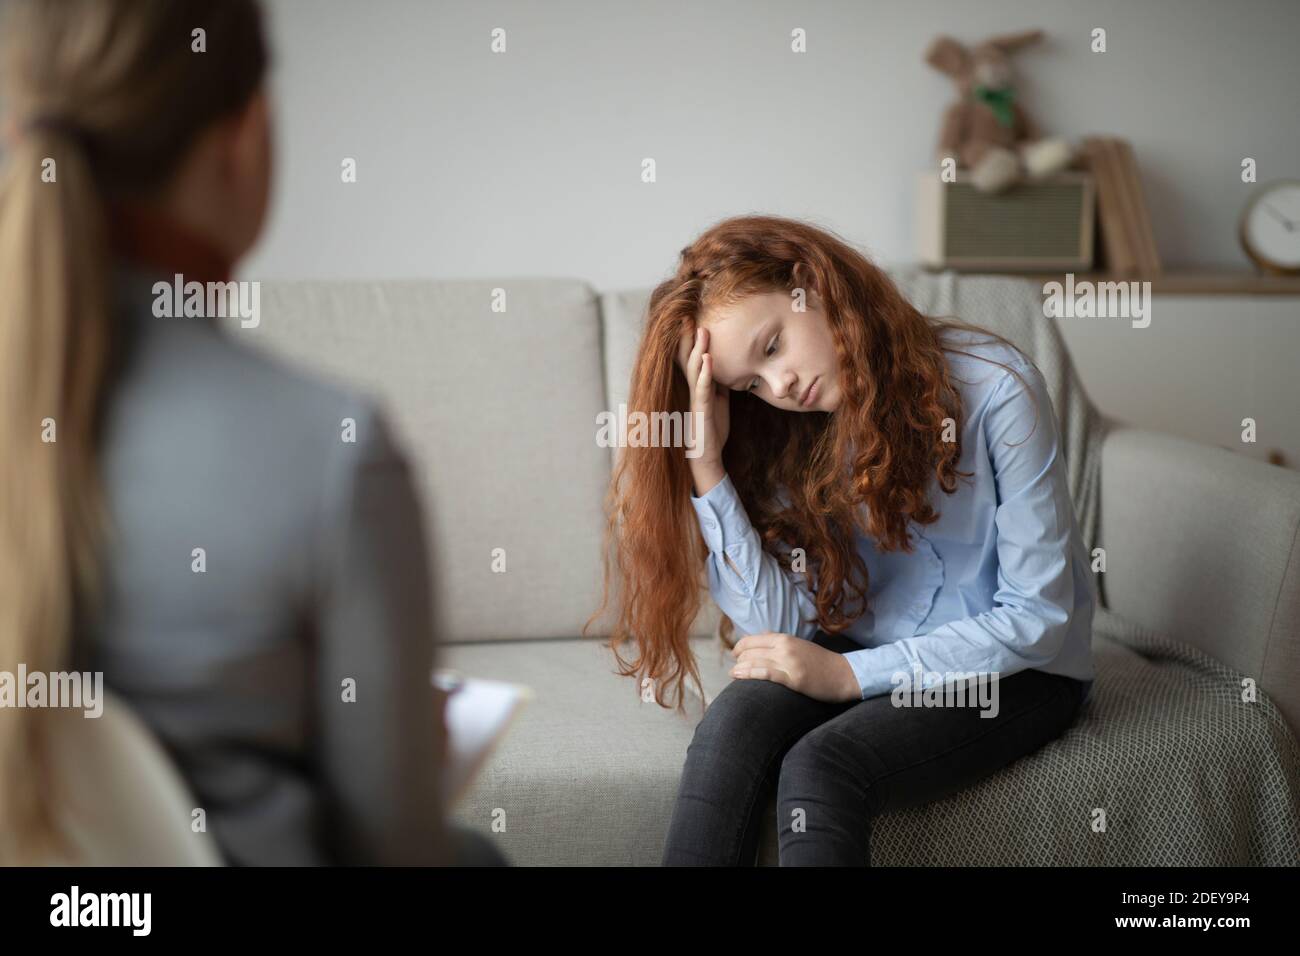 Child Psychologist. Worried sad teen girl having session with doctor Stock Photo